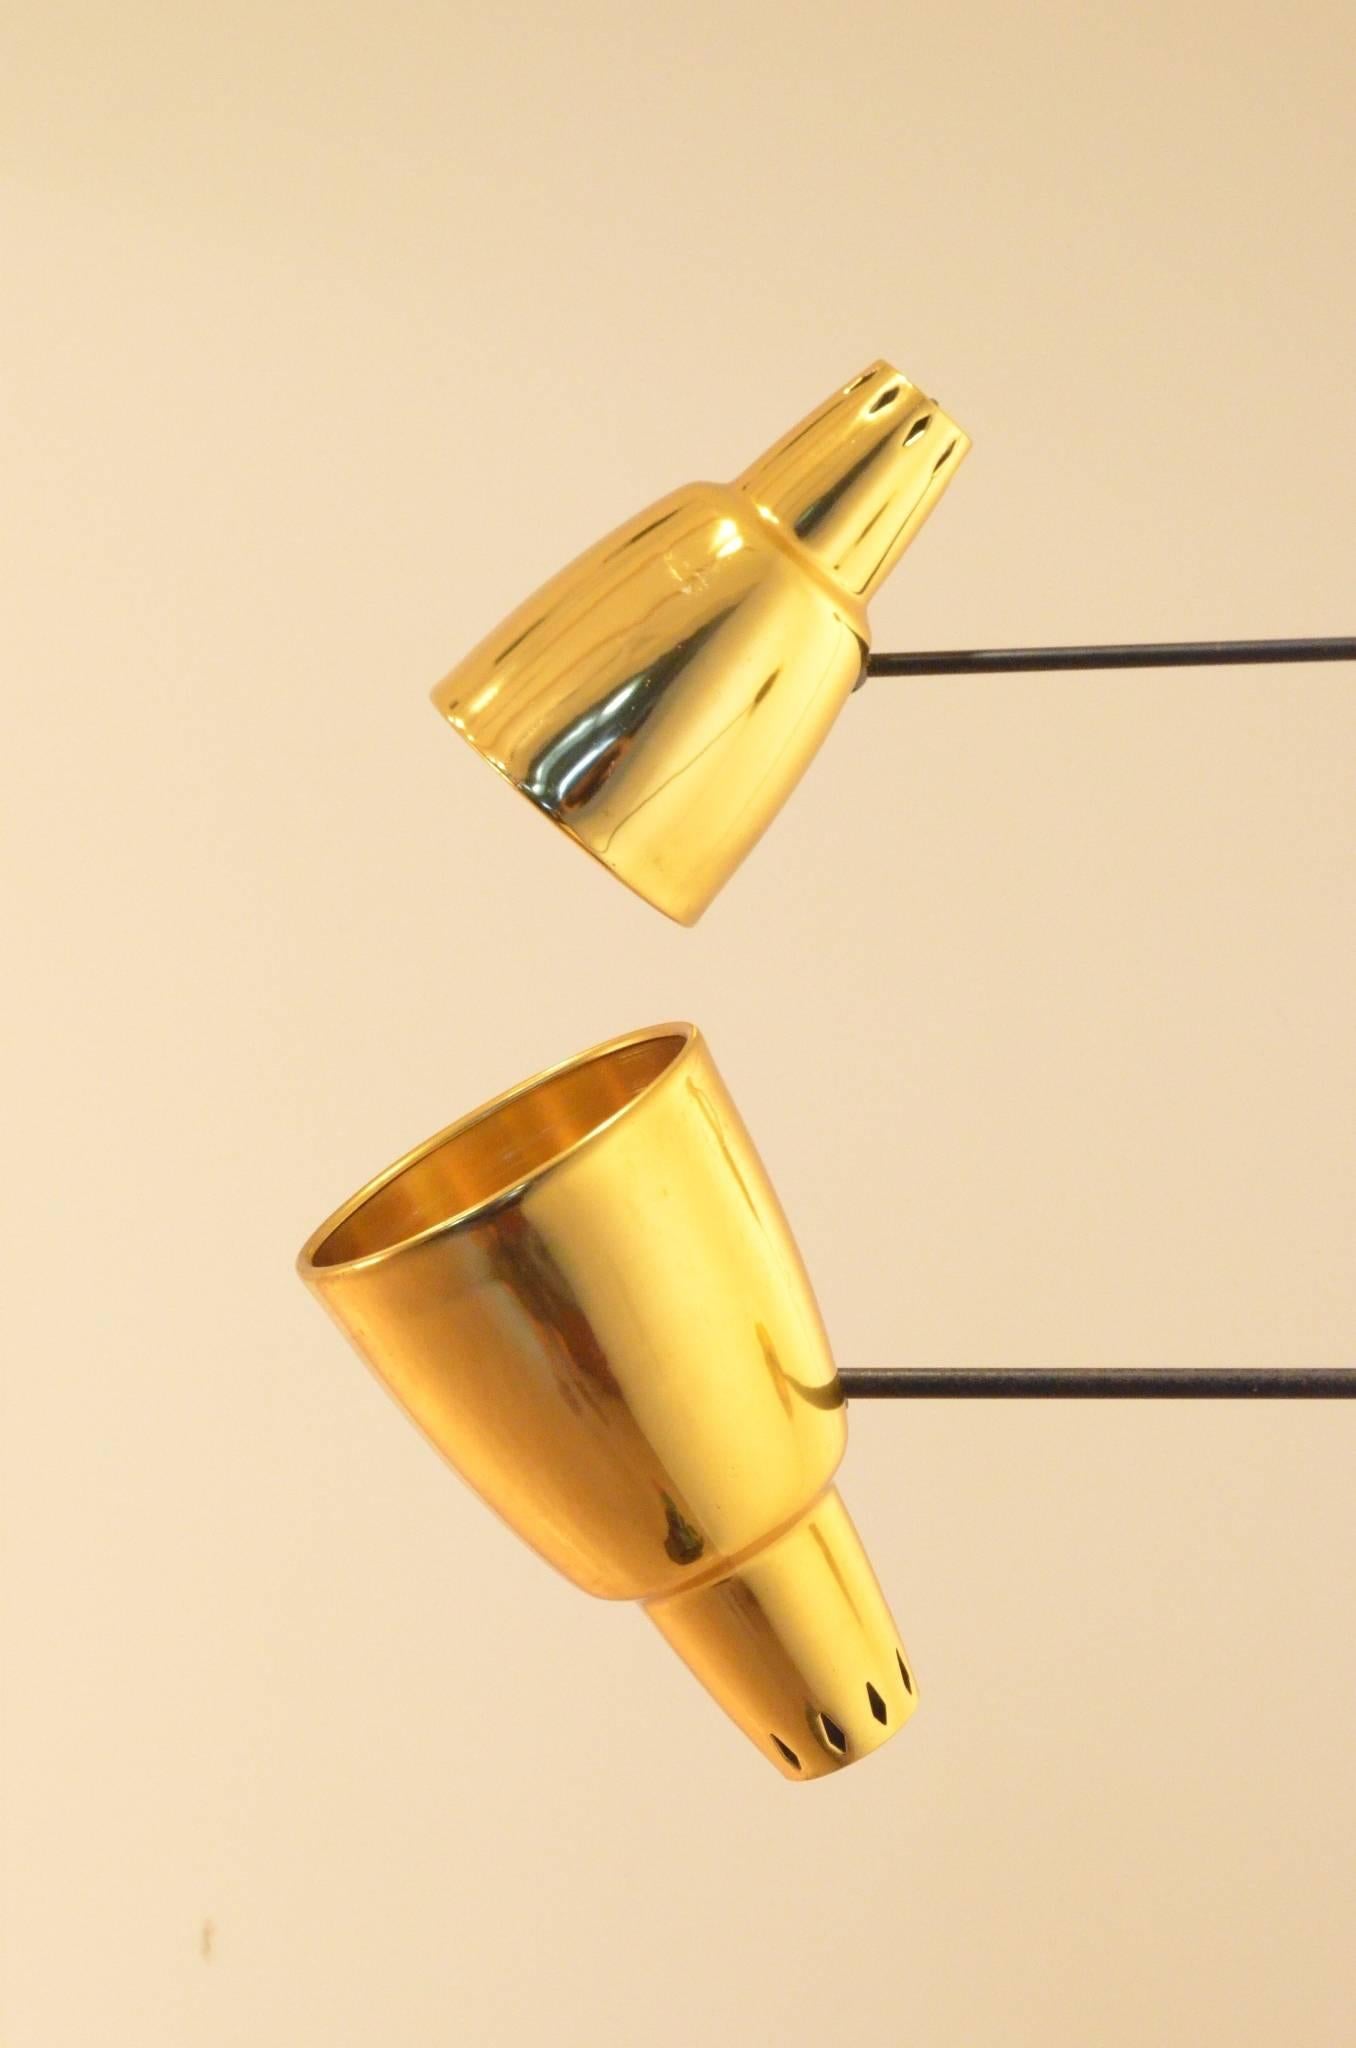 Mid-20th Century Two French Design Luminalite Golden Aluminium Metal Arm Lamps Sconces For Sale